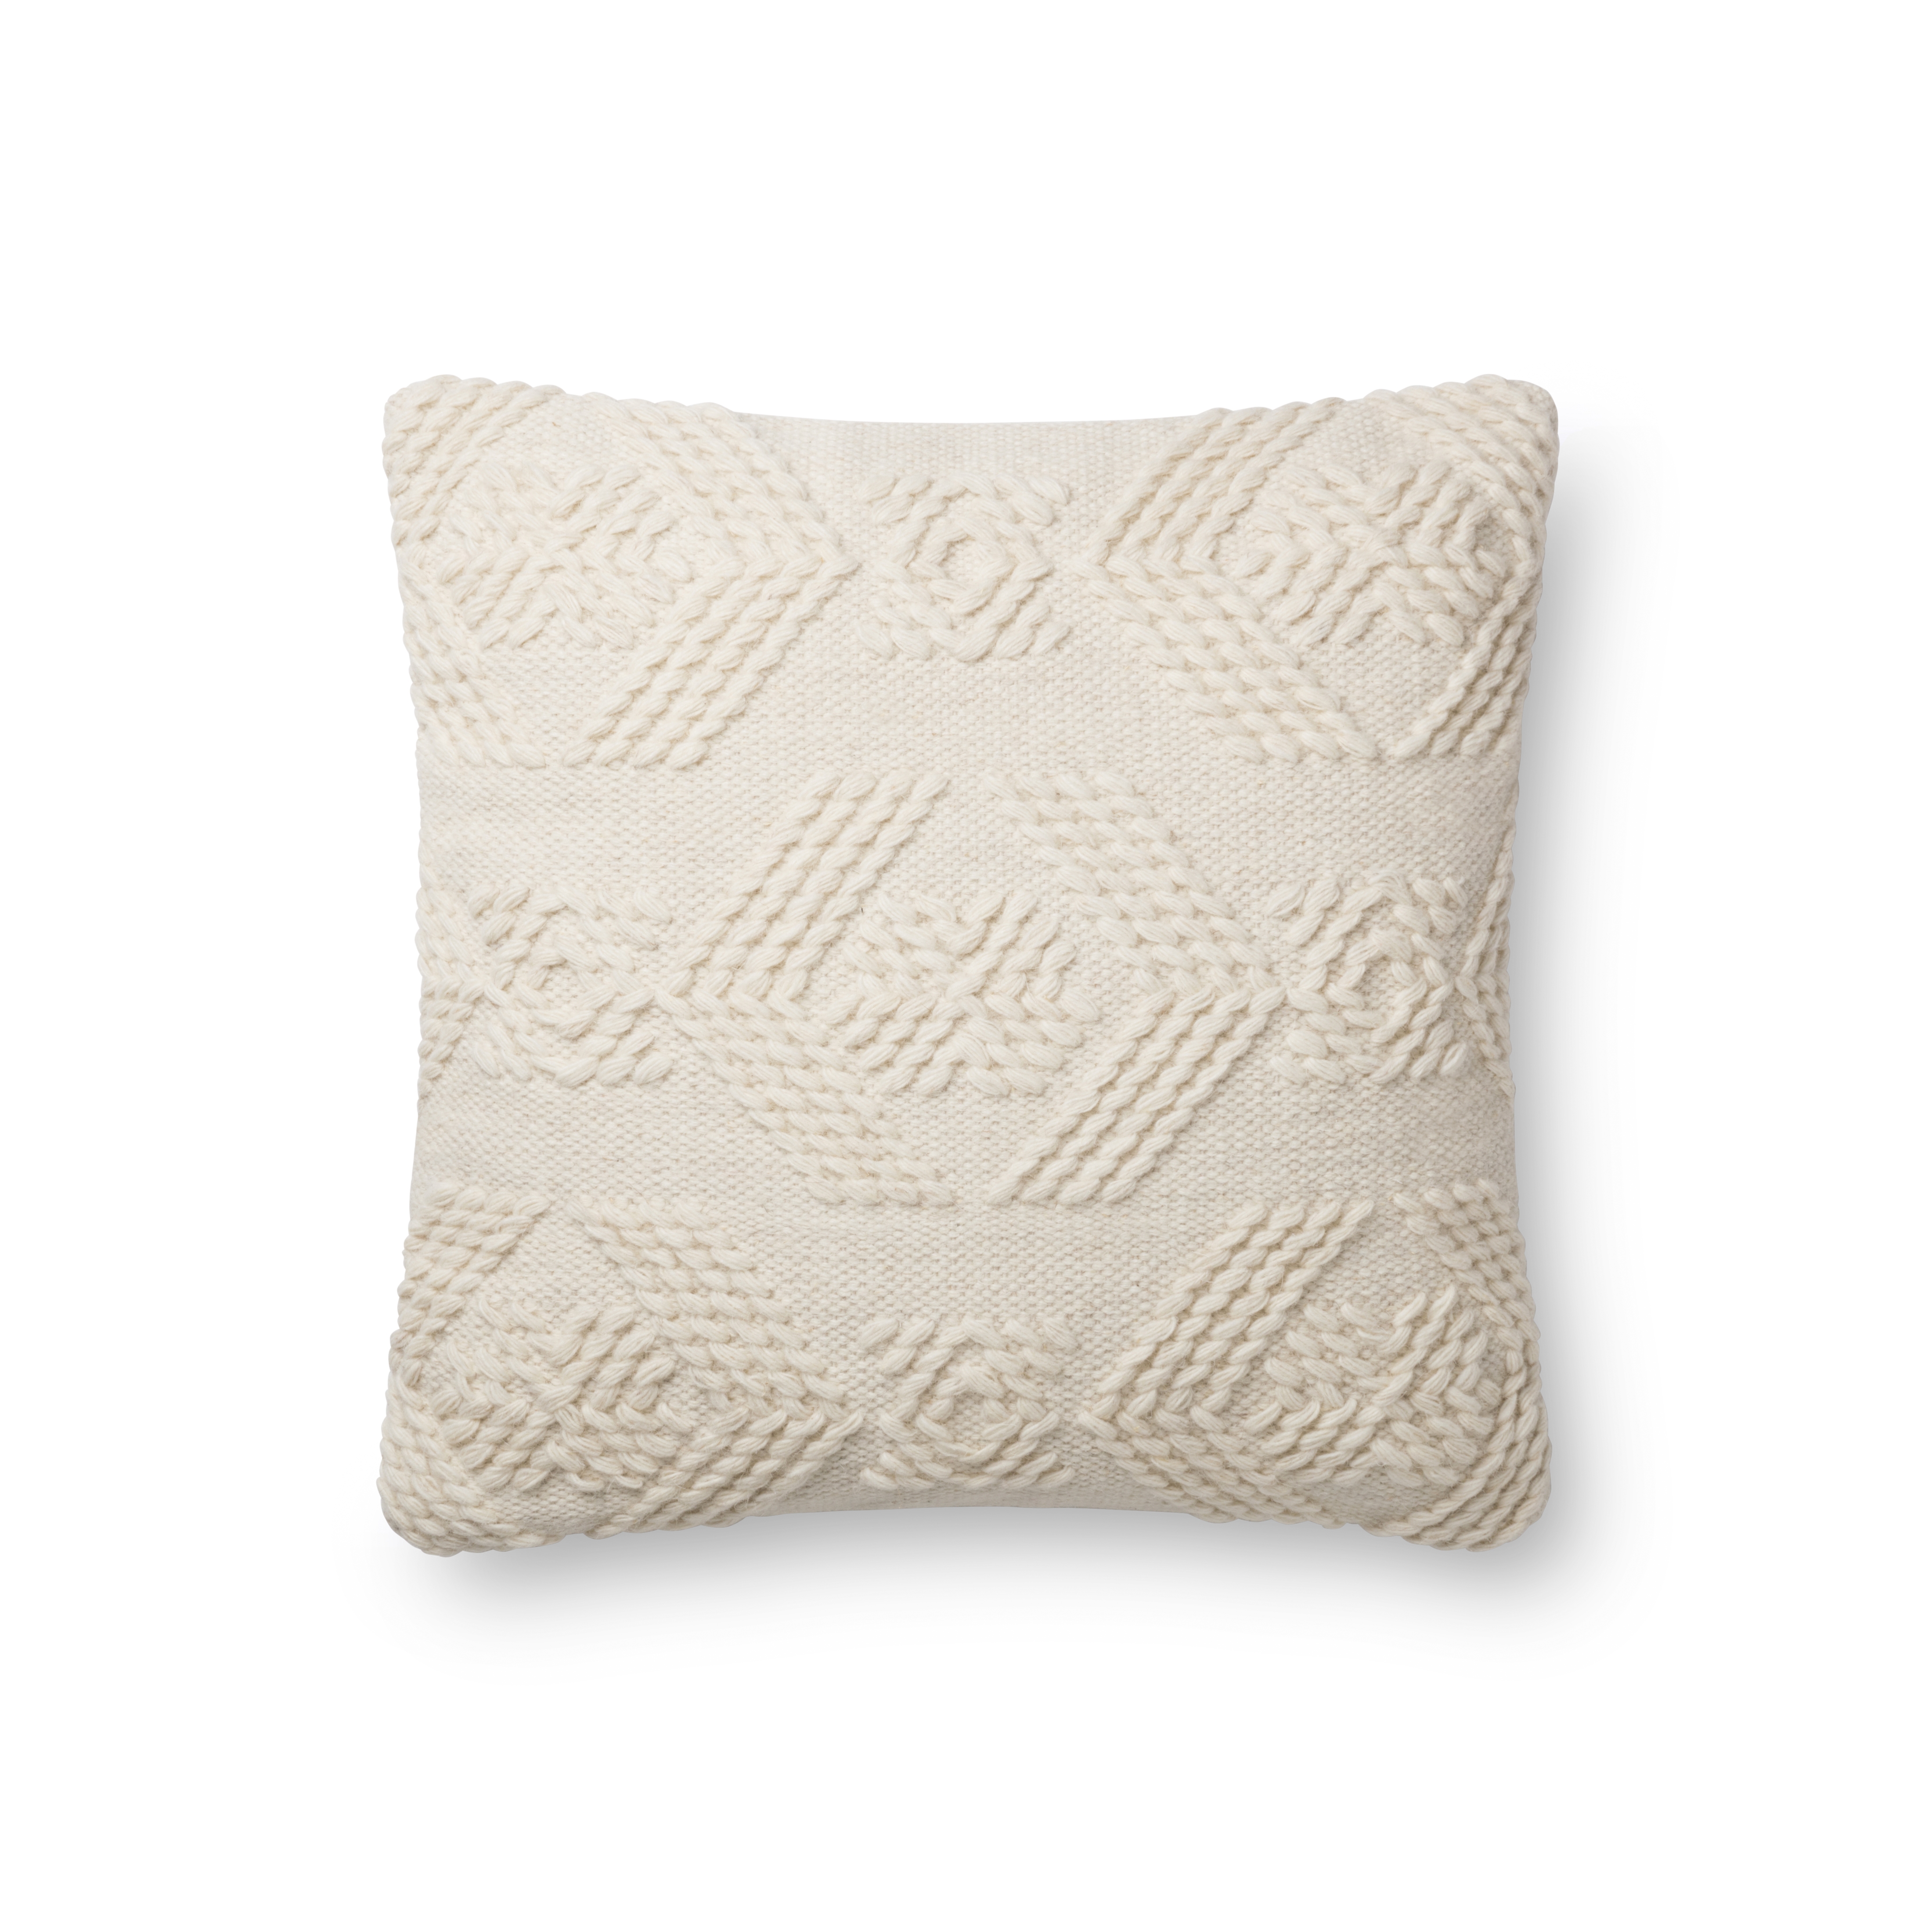 Magnolia Home by Joanna Gaines PILLOWS P1105 IVORY / IVORY 13" x 35" Cover Only - Image 0